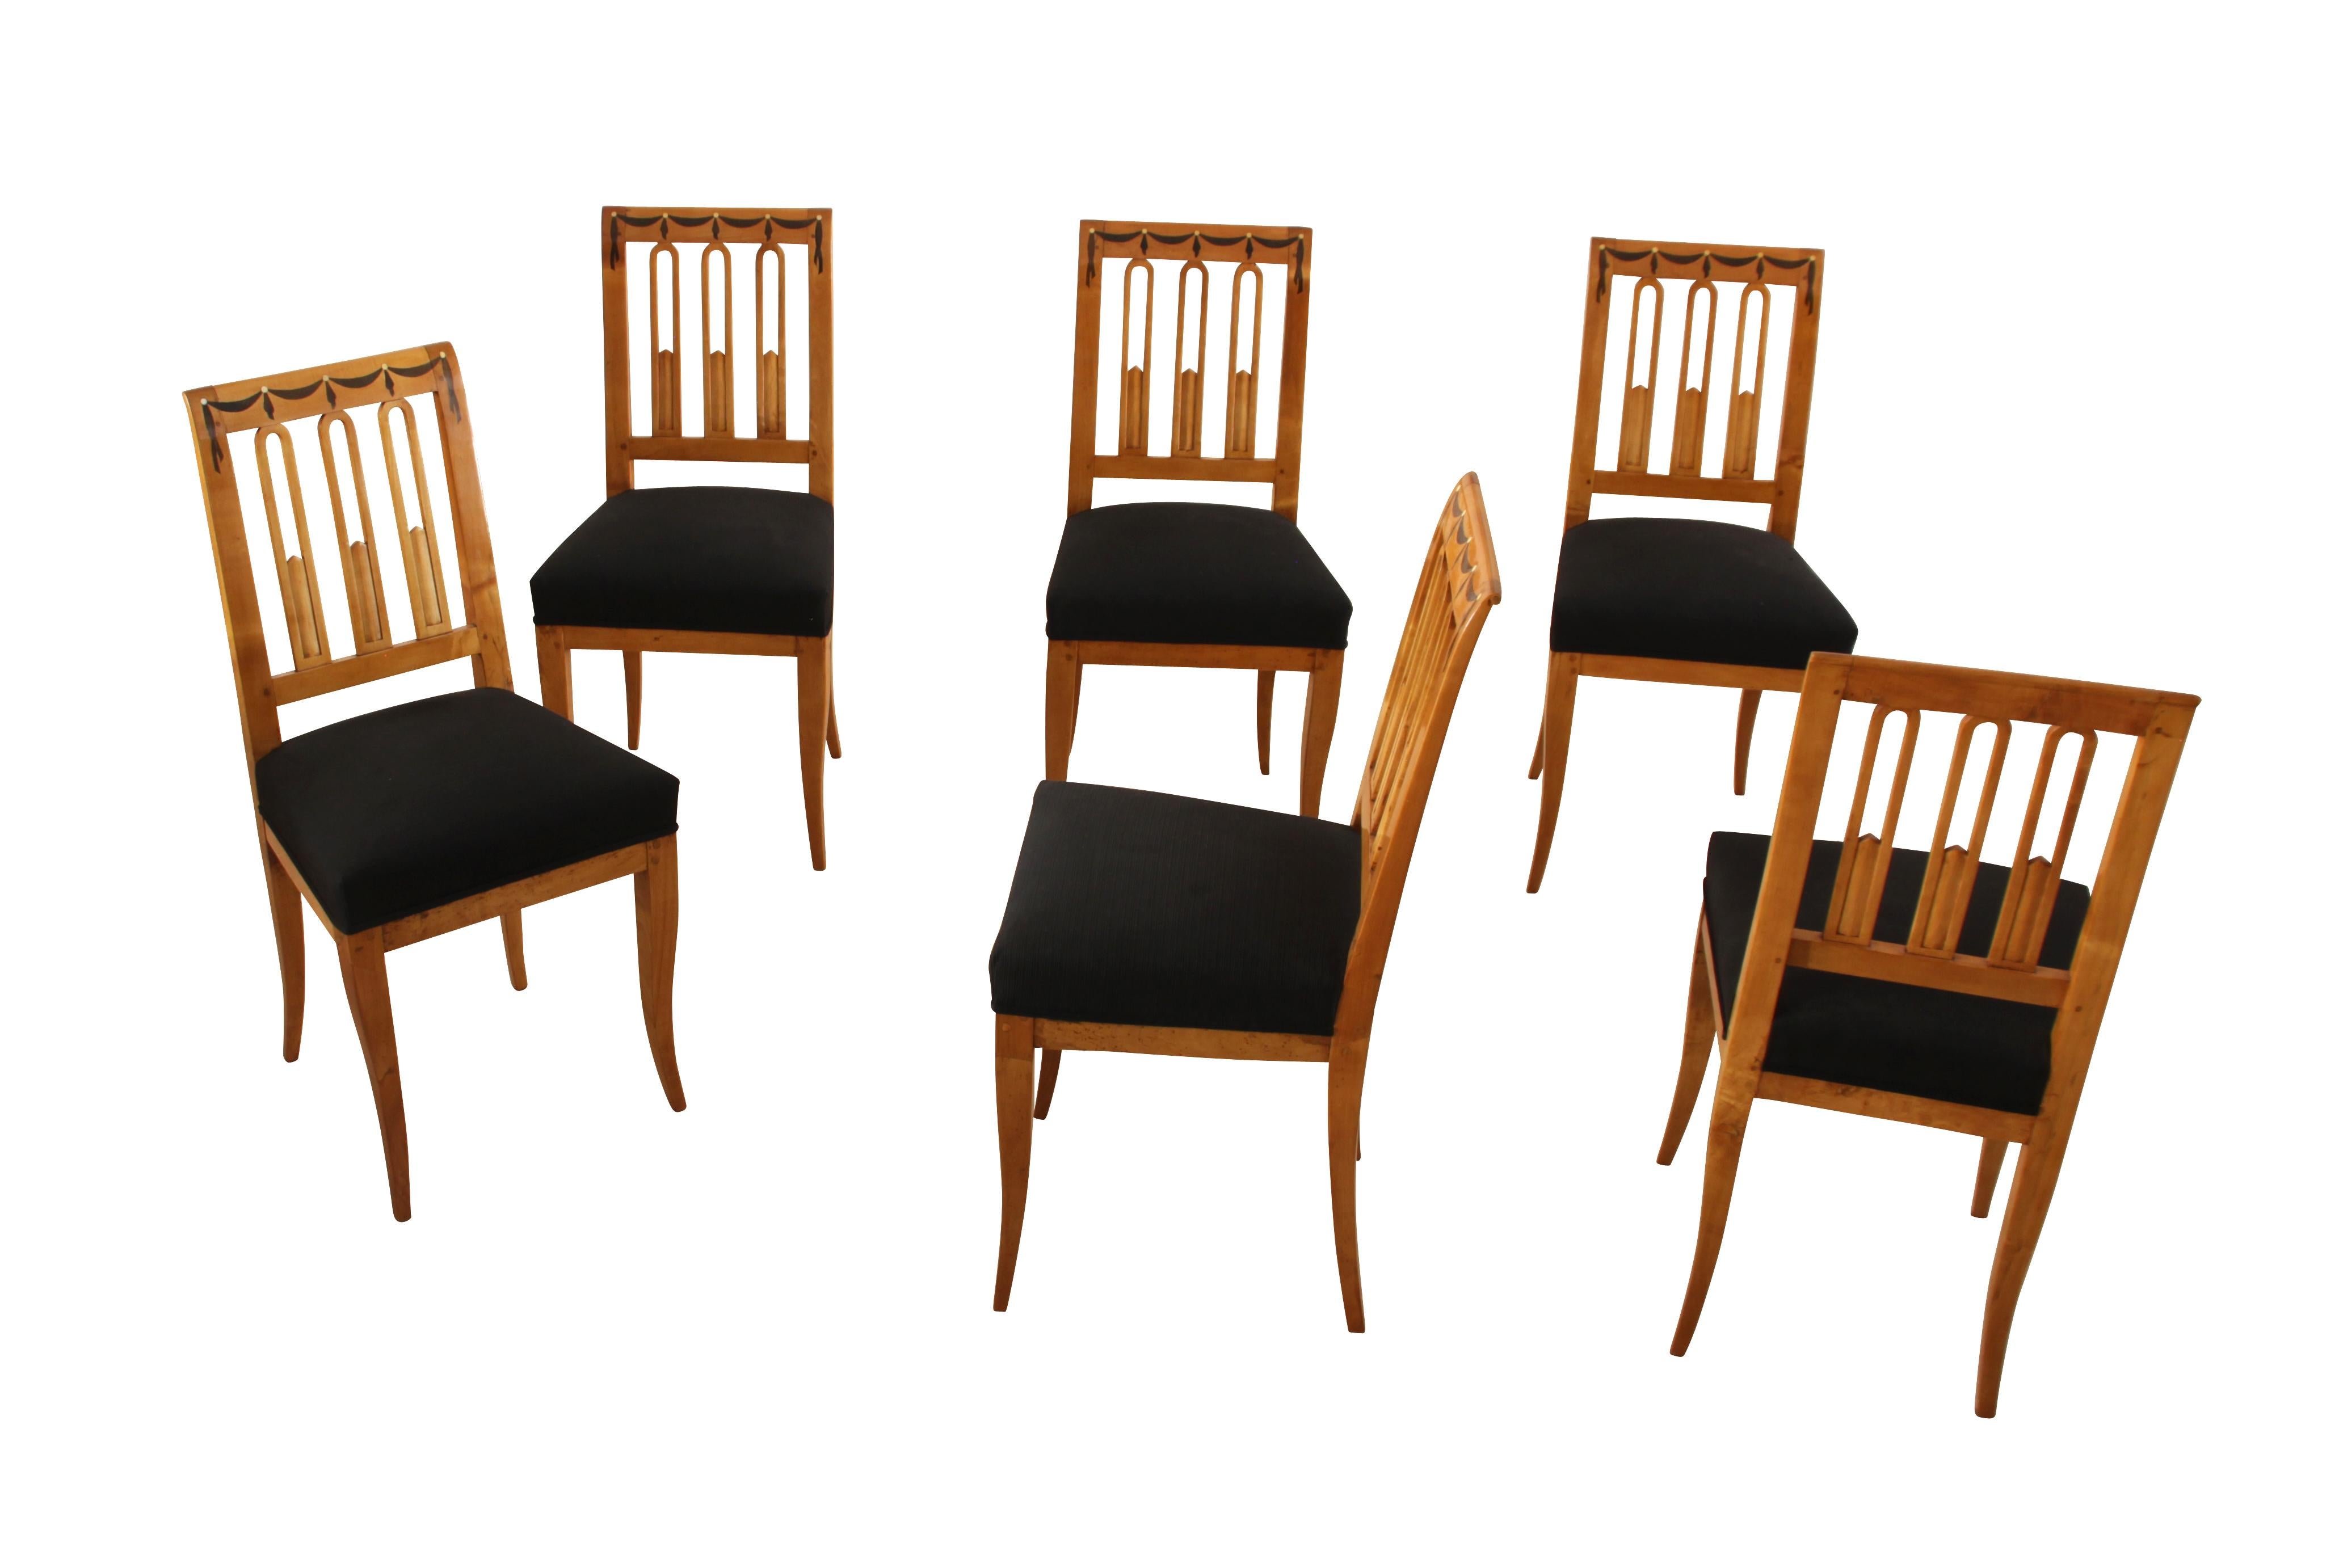 Set of six early Biedermeier chairs from South Germany about 1820.

The chairs are made from a beautiful birch solid wood. Around the top of the chairs there is are inlay marquetries made of ebony and bone, in form of a garland. Very neoclassical